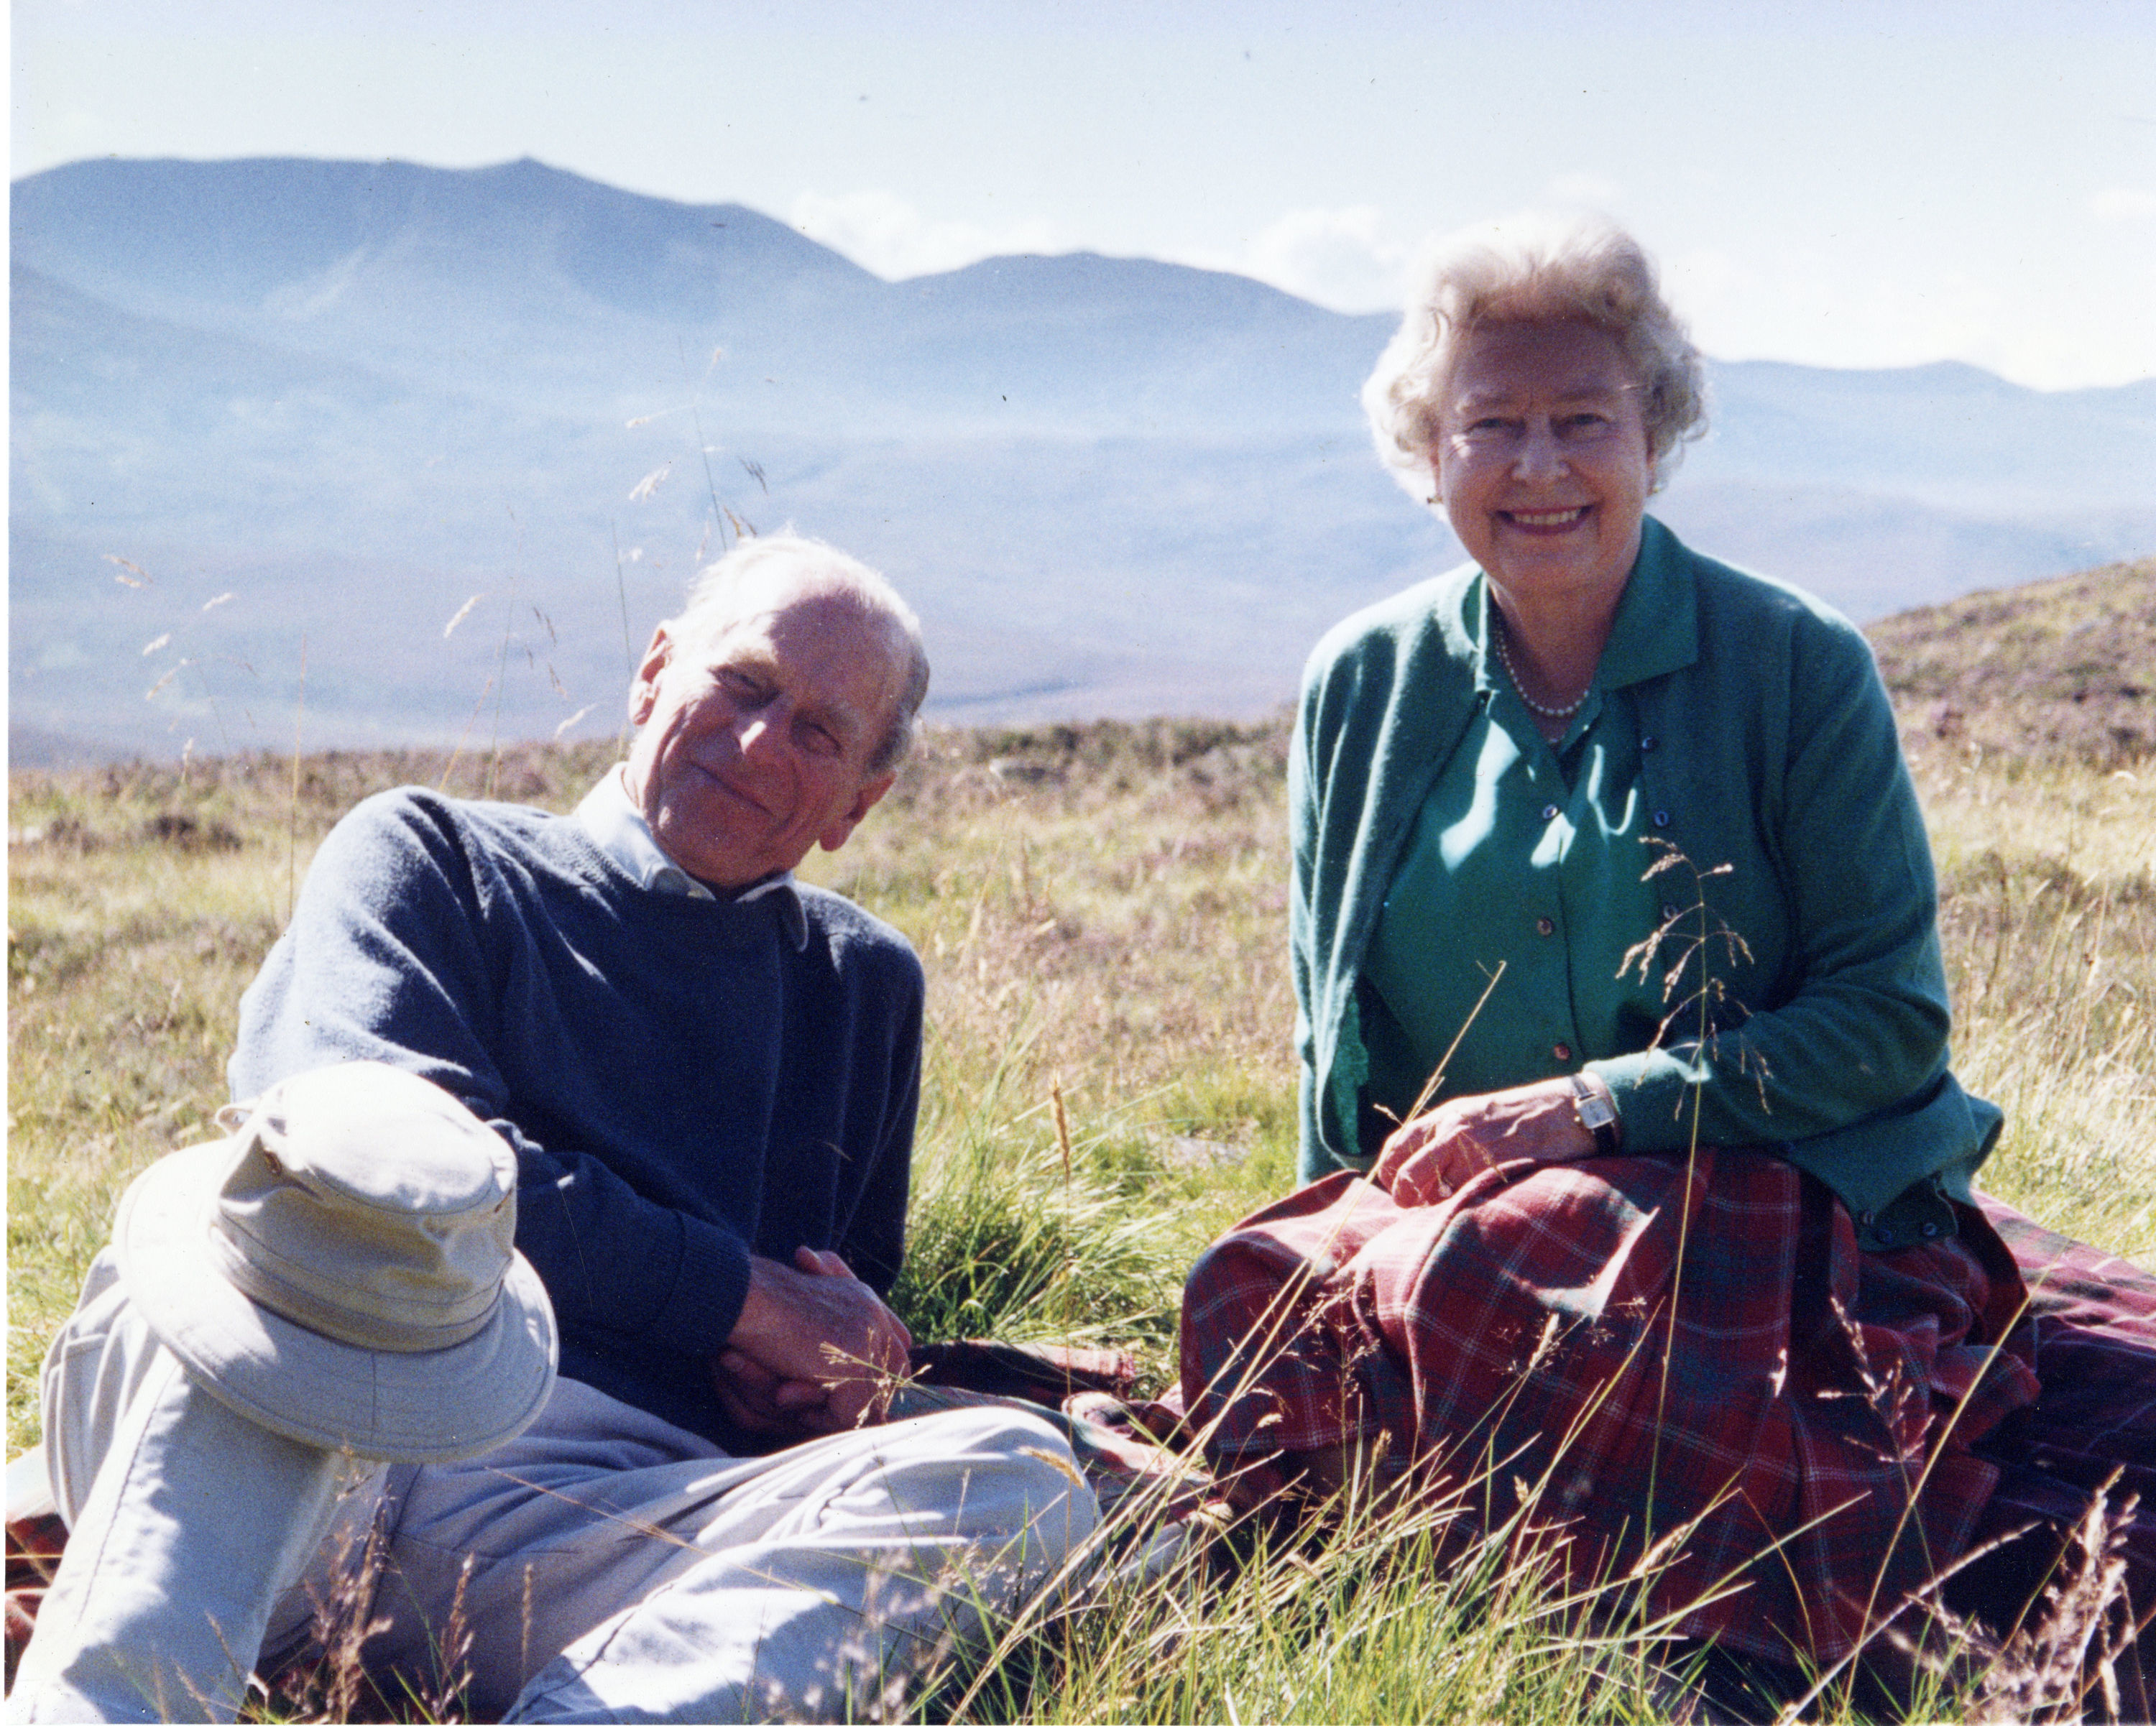 <p>This personal photograph of Queen Elizabeth II and Prince Philip at the top of the Coyles of Muick in Scotland, taken by Sophie, Countess of Wessex in 2003, was released by the palace in April 2021 in the wake of <a href="https://www.wonderwall.com/celebrity/royals/prince-philips-funeral-all-the-photos-and-details-447299.gallery">the Duke of Edinburgh's death</a>.</p>